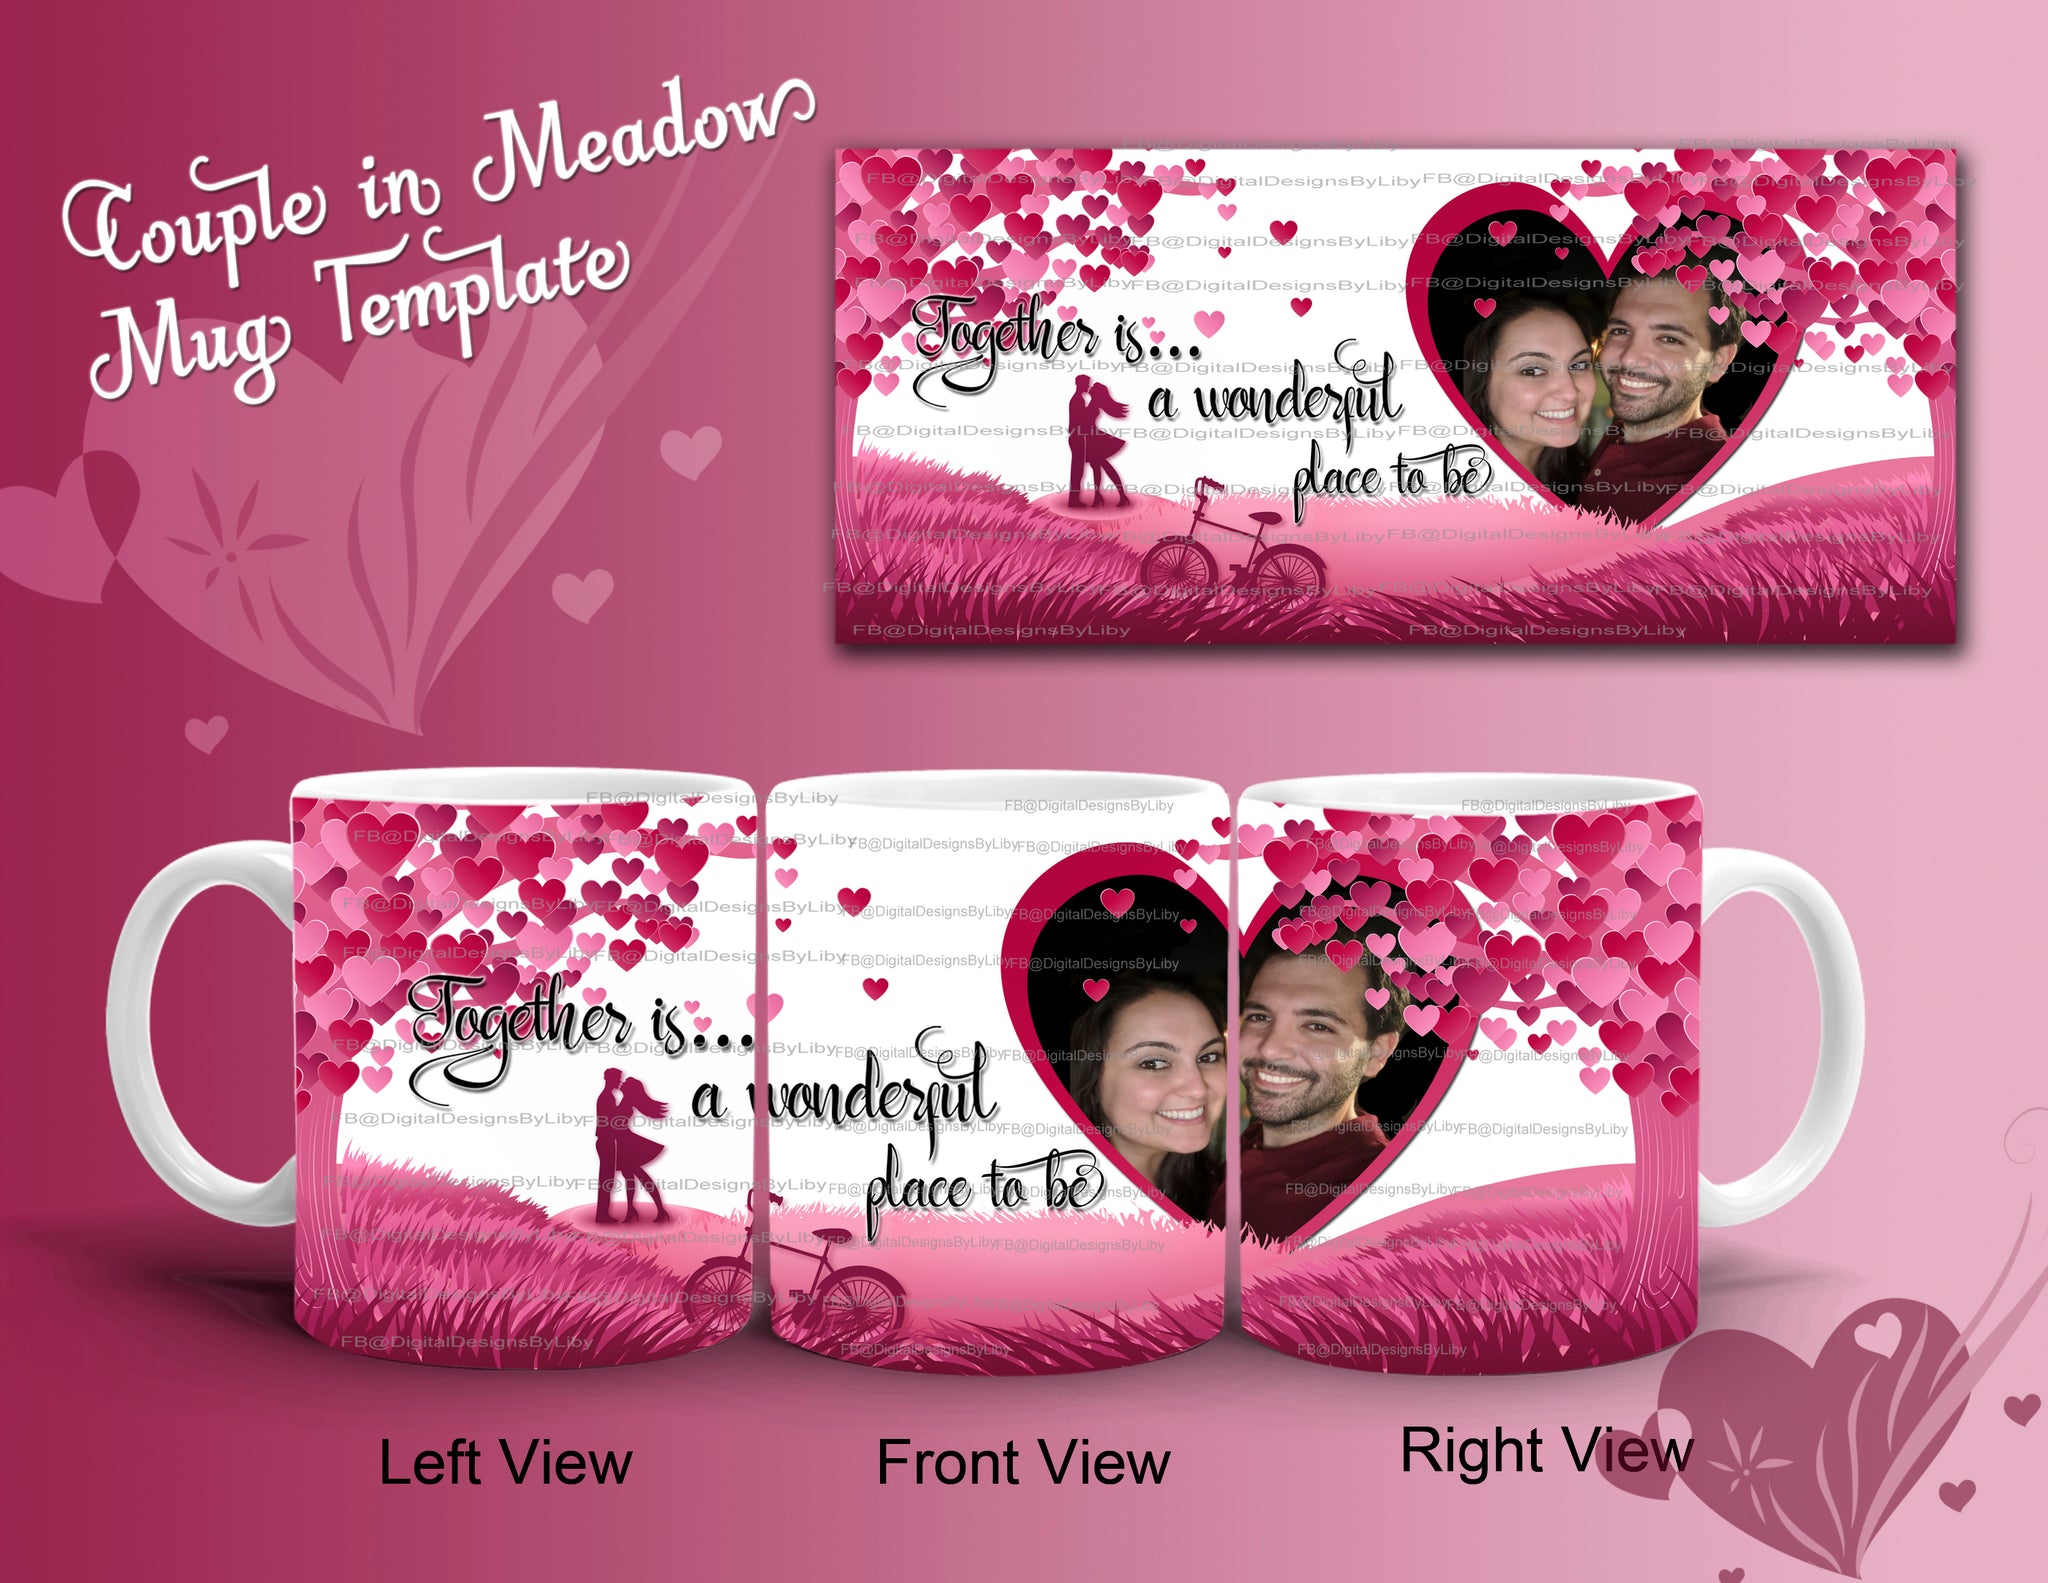 Couple In Meadow Mug Template – Digital Designs by Liby